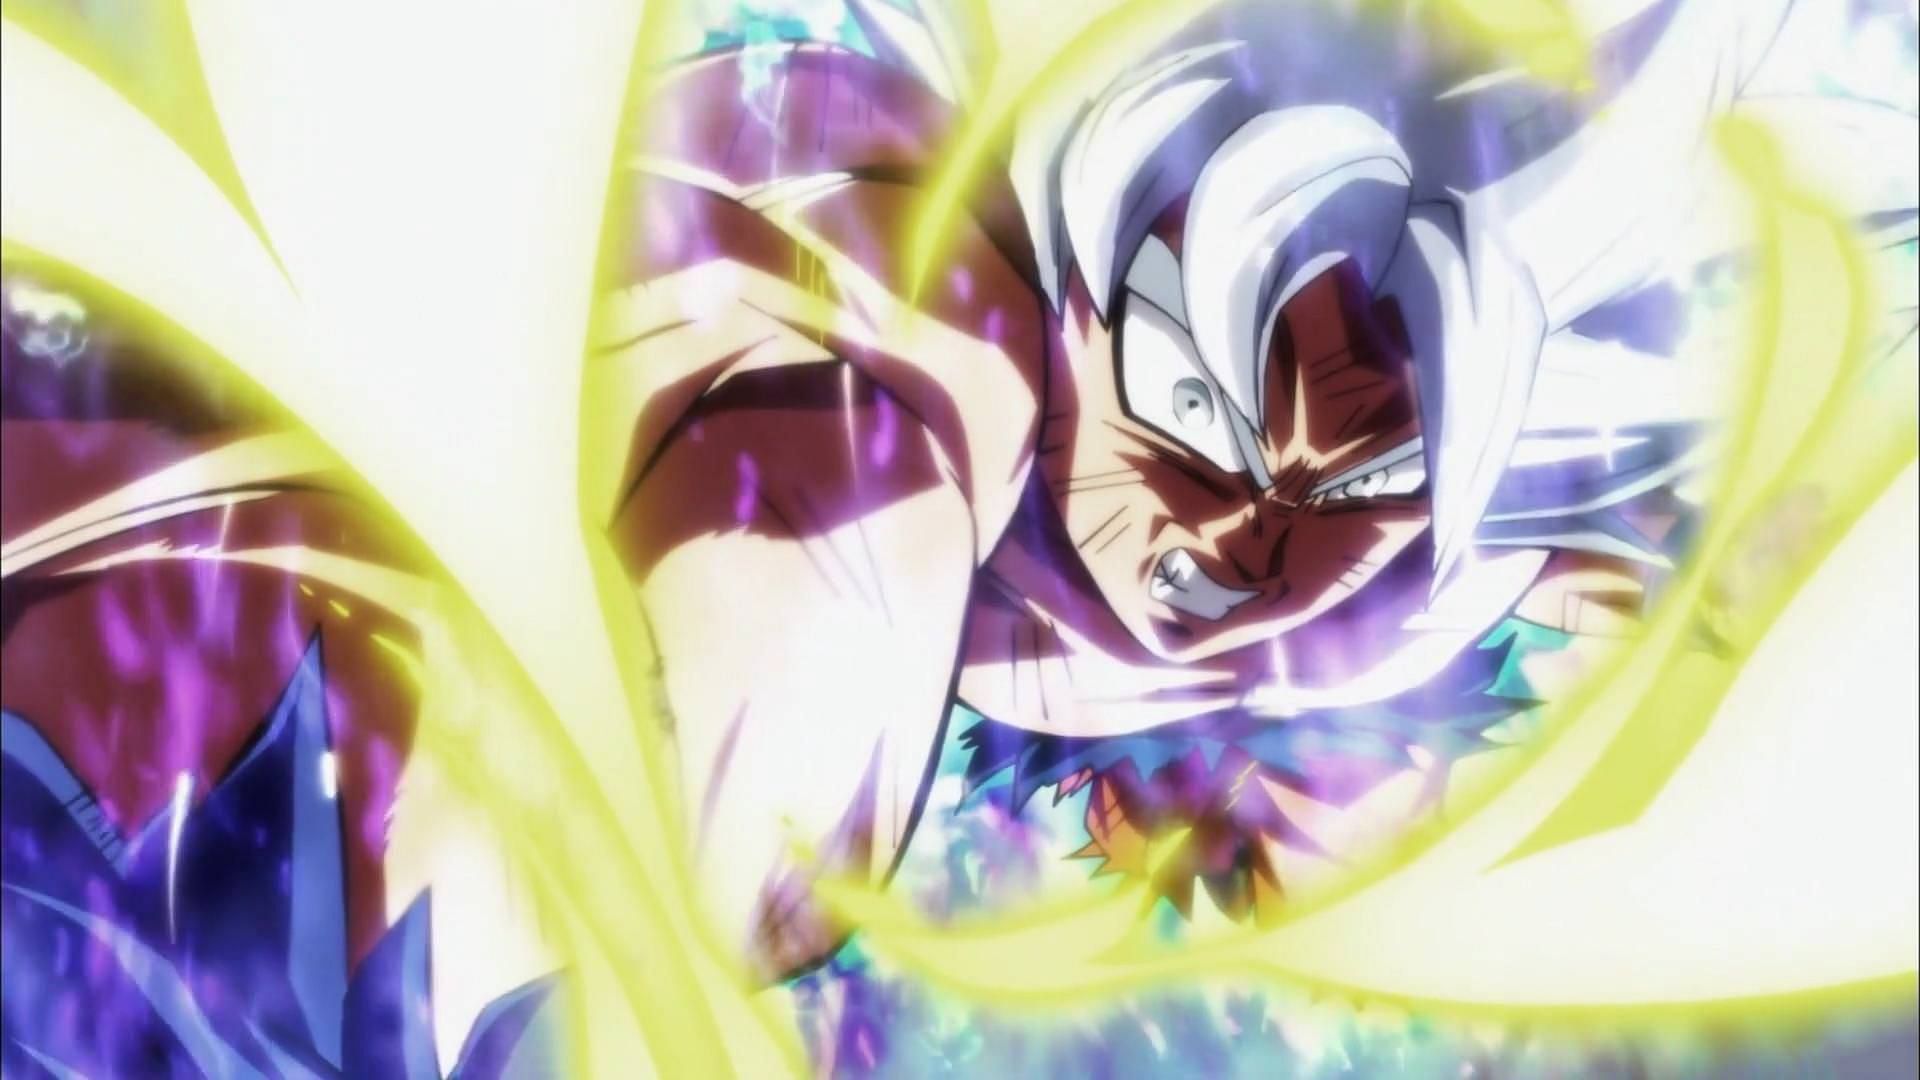 10 anime characters with powers stronger than Ultra Instinct